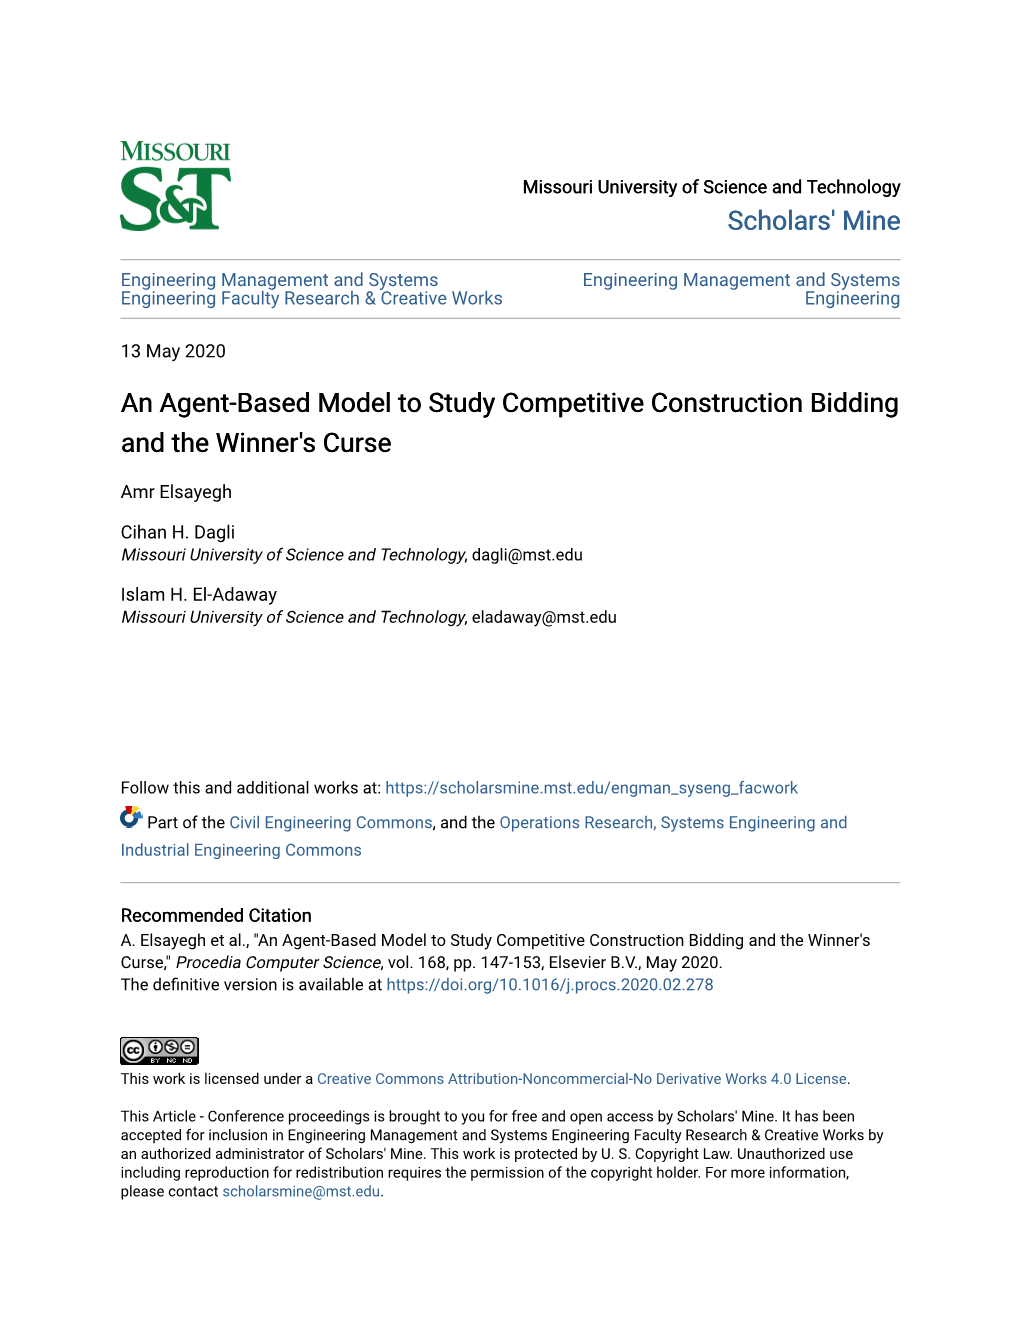 An Agent-Based Model to Study Competitive Construction Bidding and the Winner's Curse